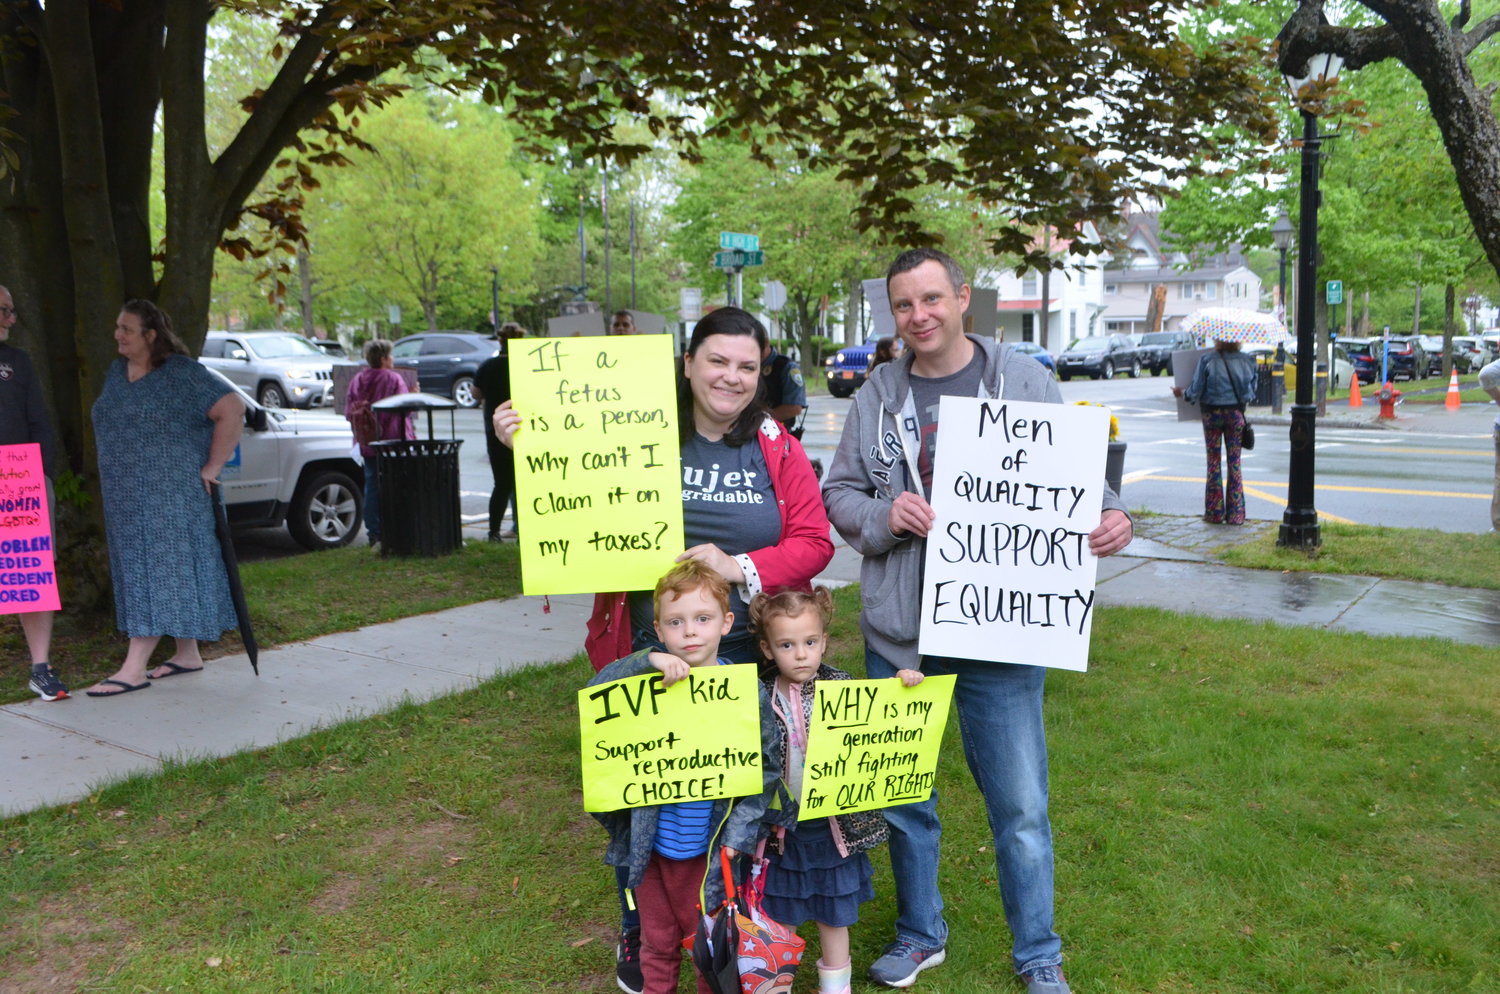 The Bredhold family all created and showcased their signs in support of women’s rights to their bodily autonomy at the protest Saturday evening held in Milford, PA.